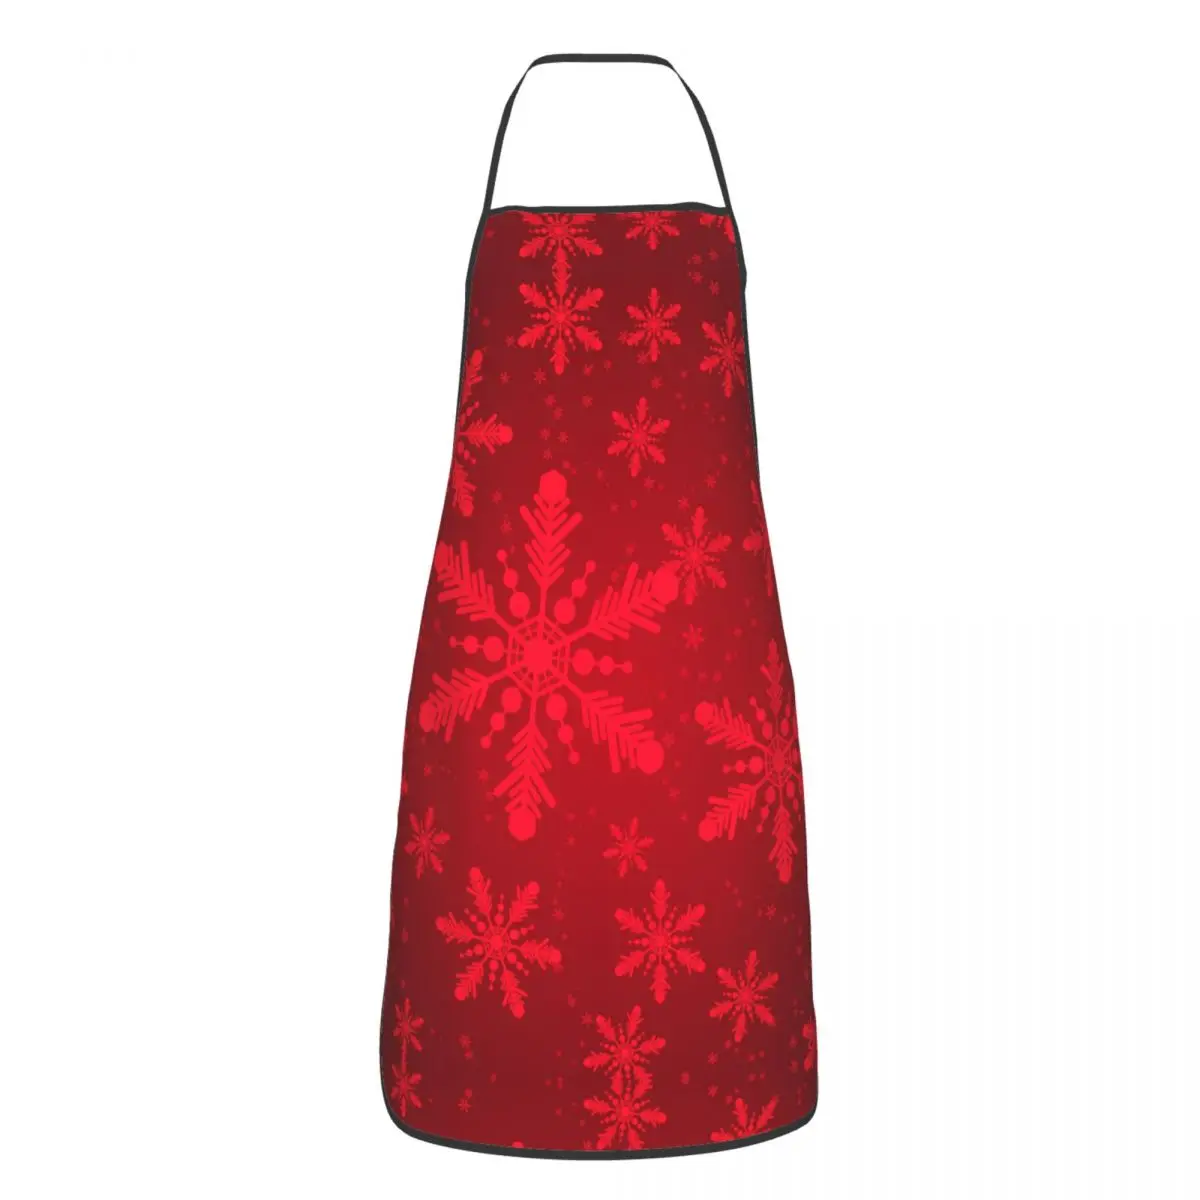 

Red Bokeh Snowflakes Apron Cuisine Cooking Baking Painting Abstract Christmas Aprons Kitchen Waterproof Tablier for Men Women